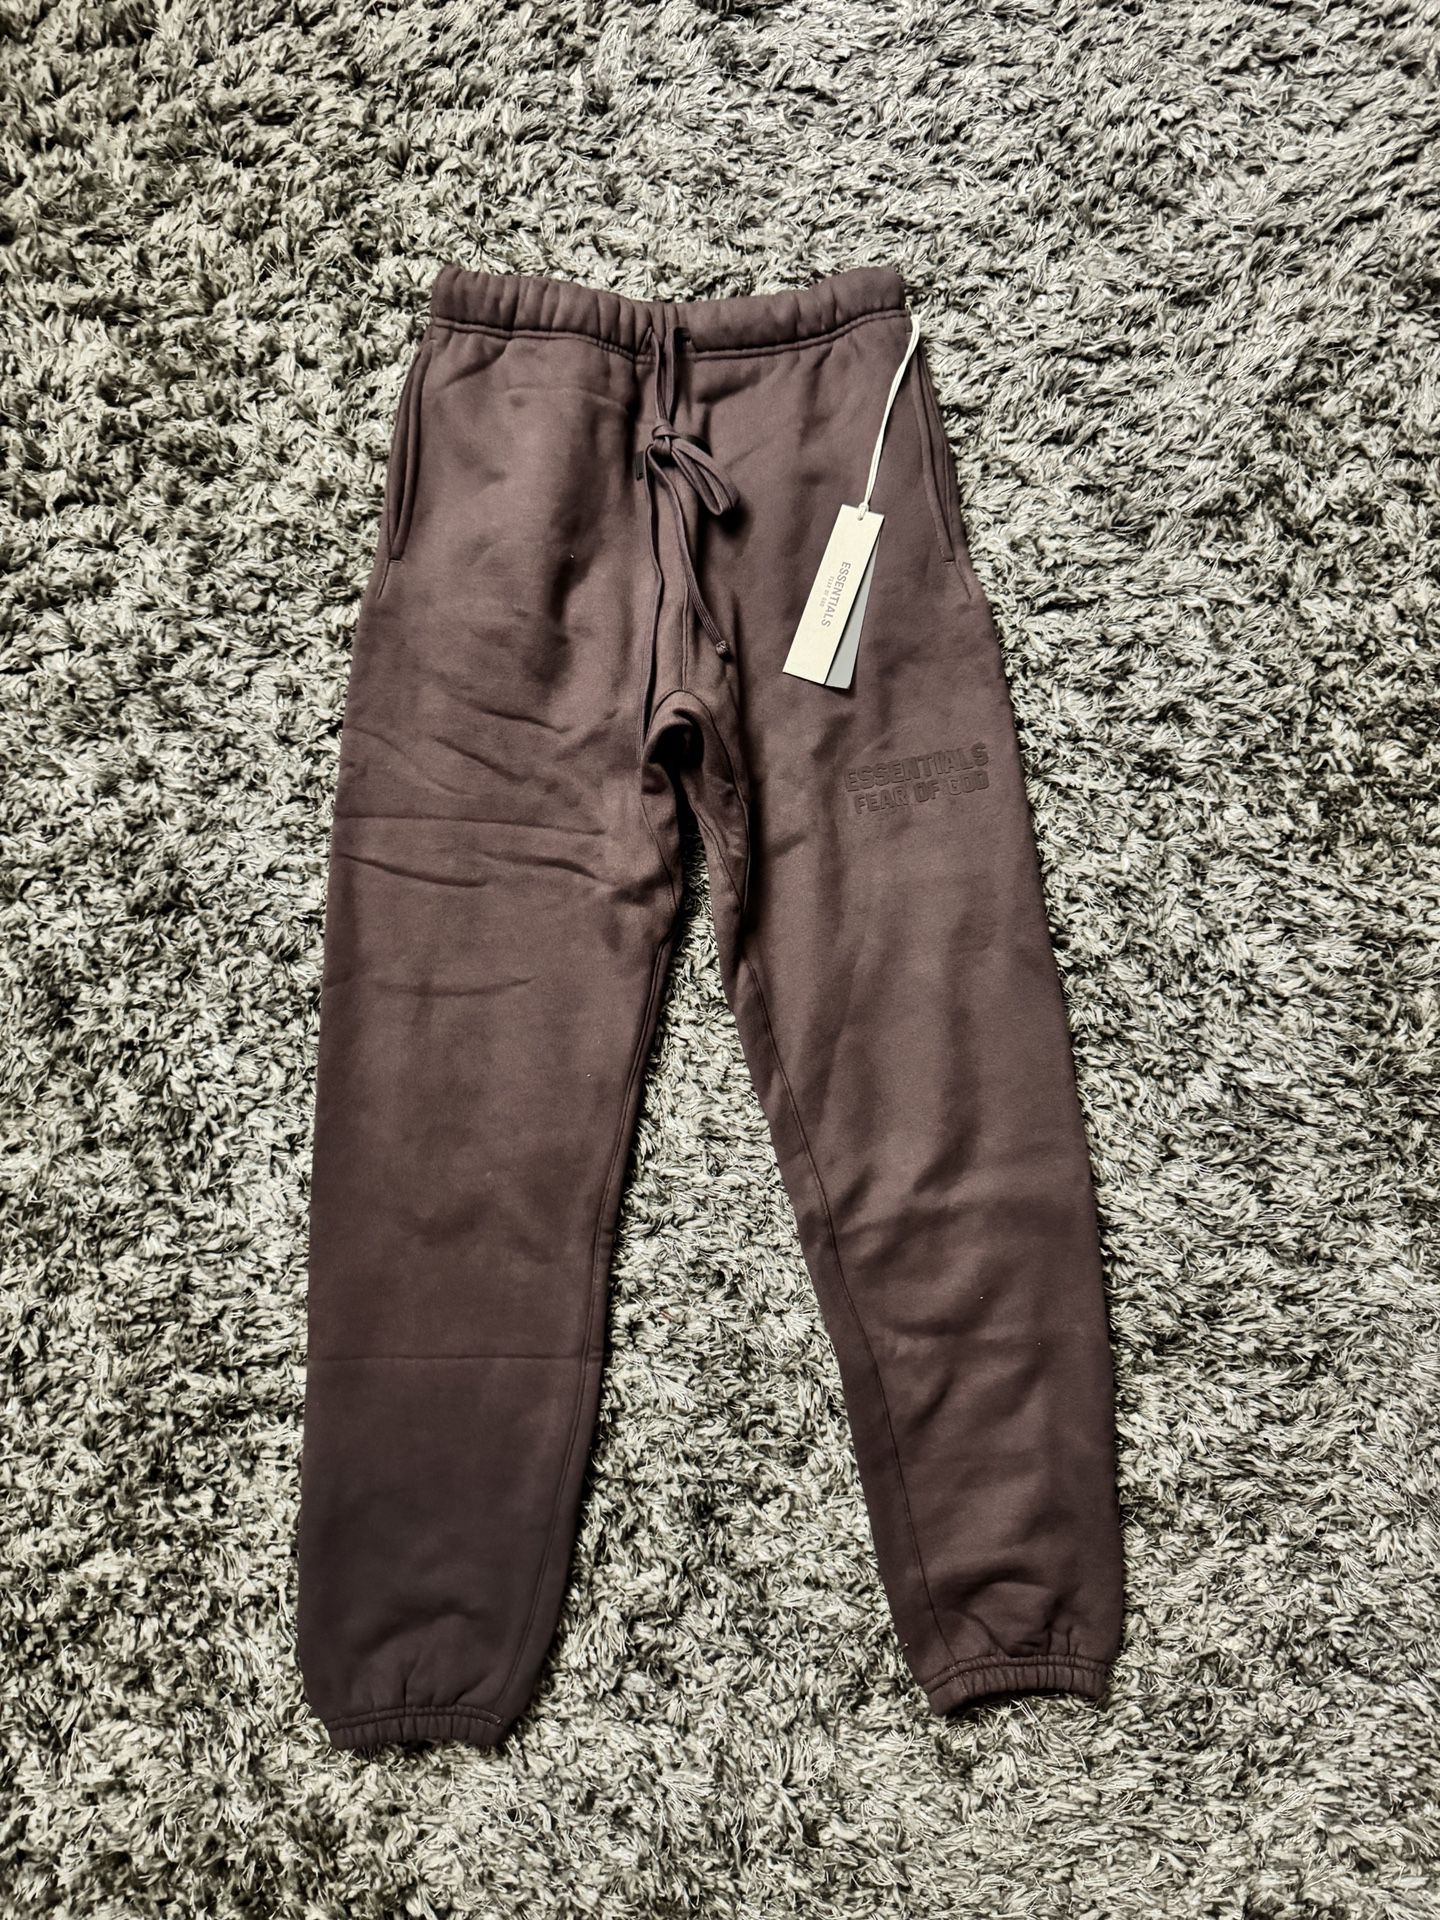 Fear Of God x Nike NBA Warm-Up Pants Off Noir Size Medium Brand New DS for  Sale in San Diego, CA - OfferUp